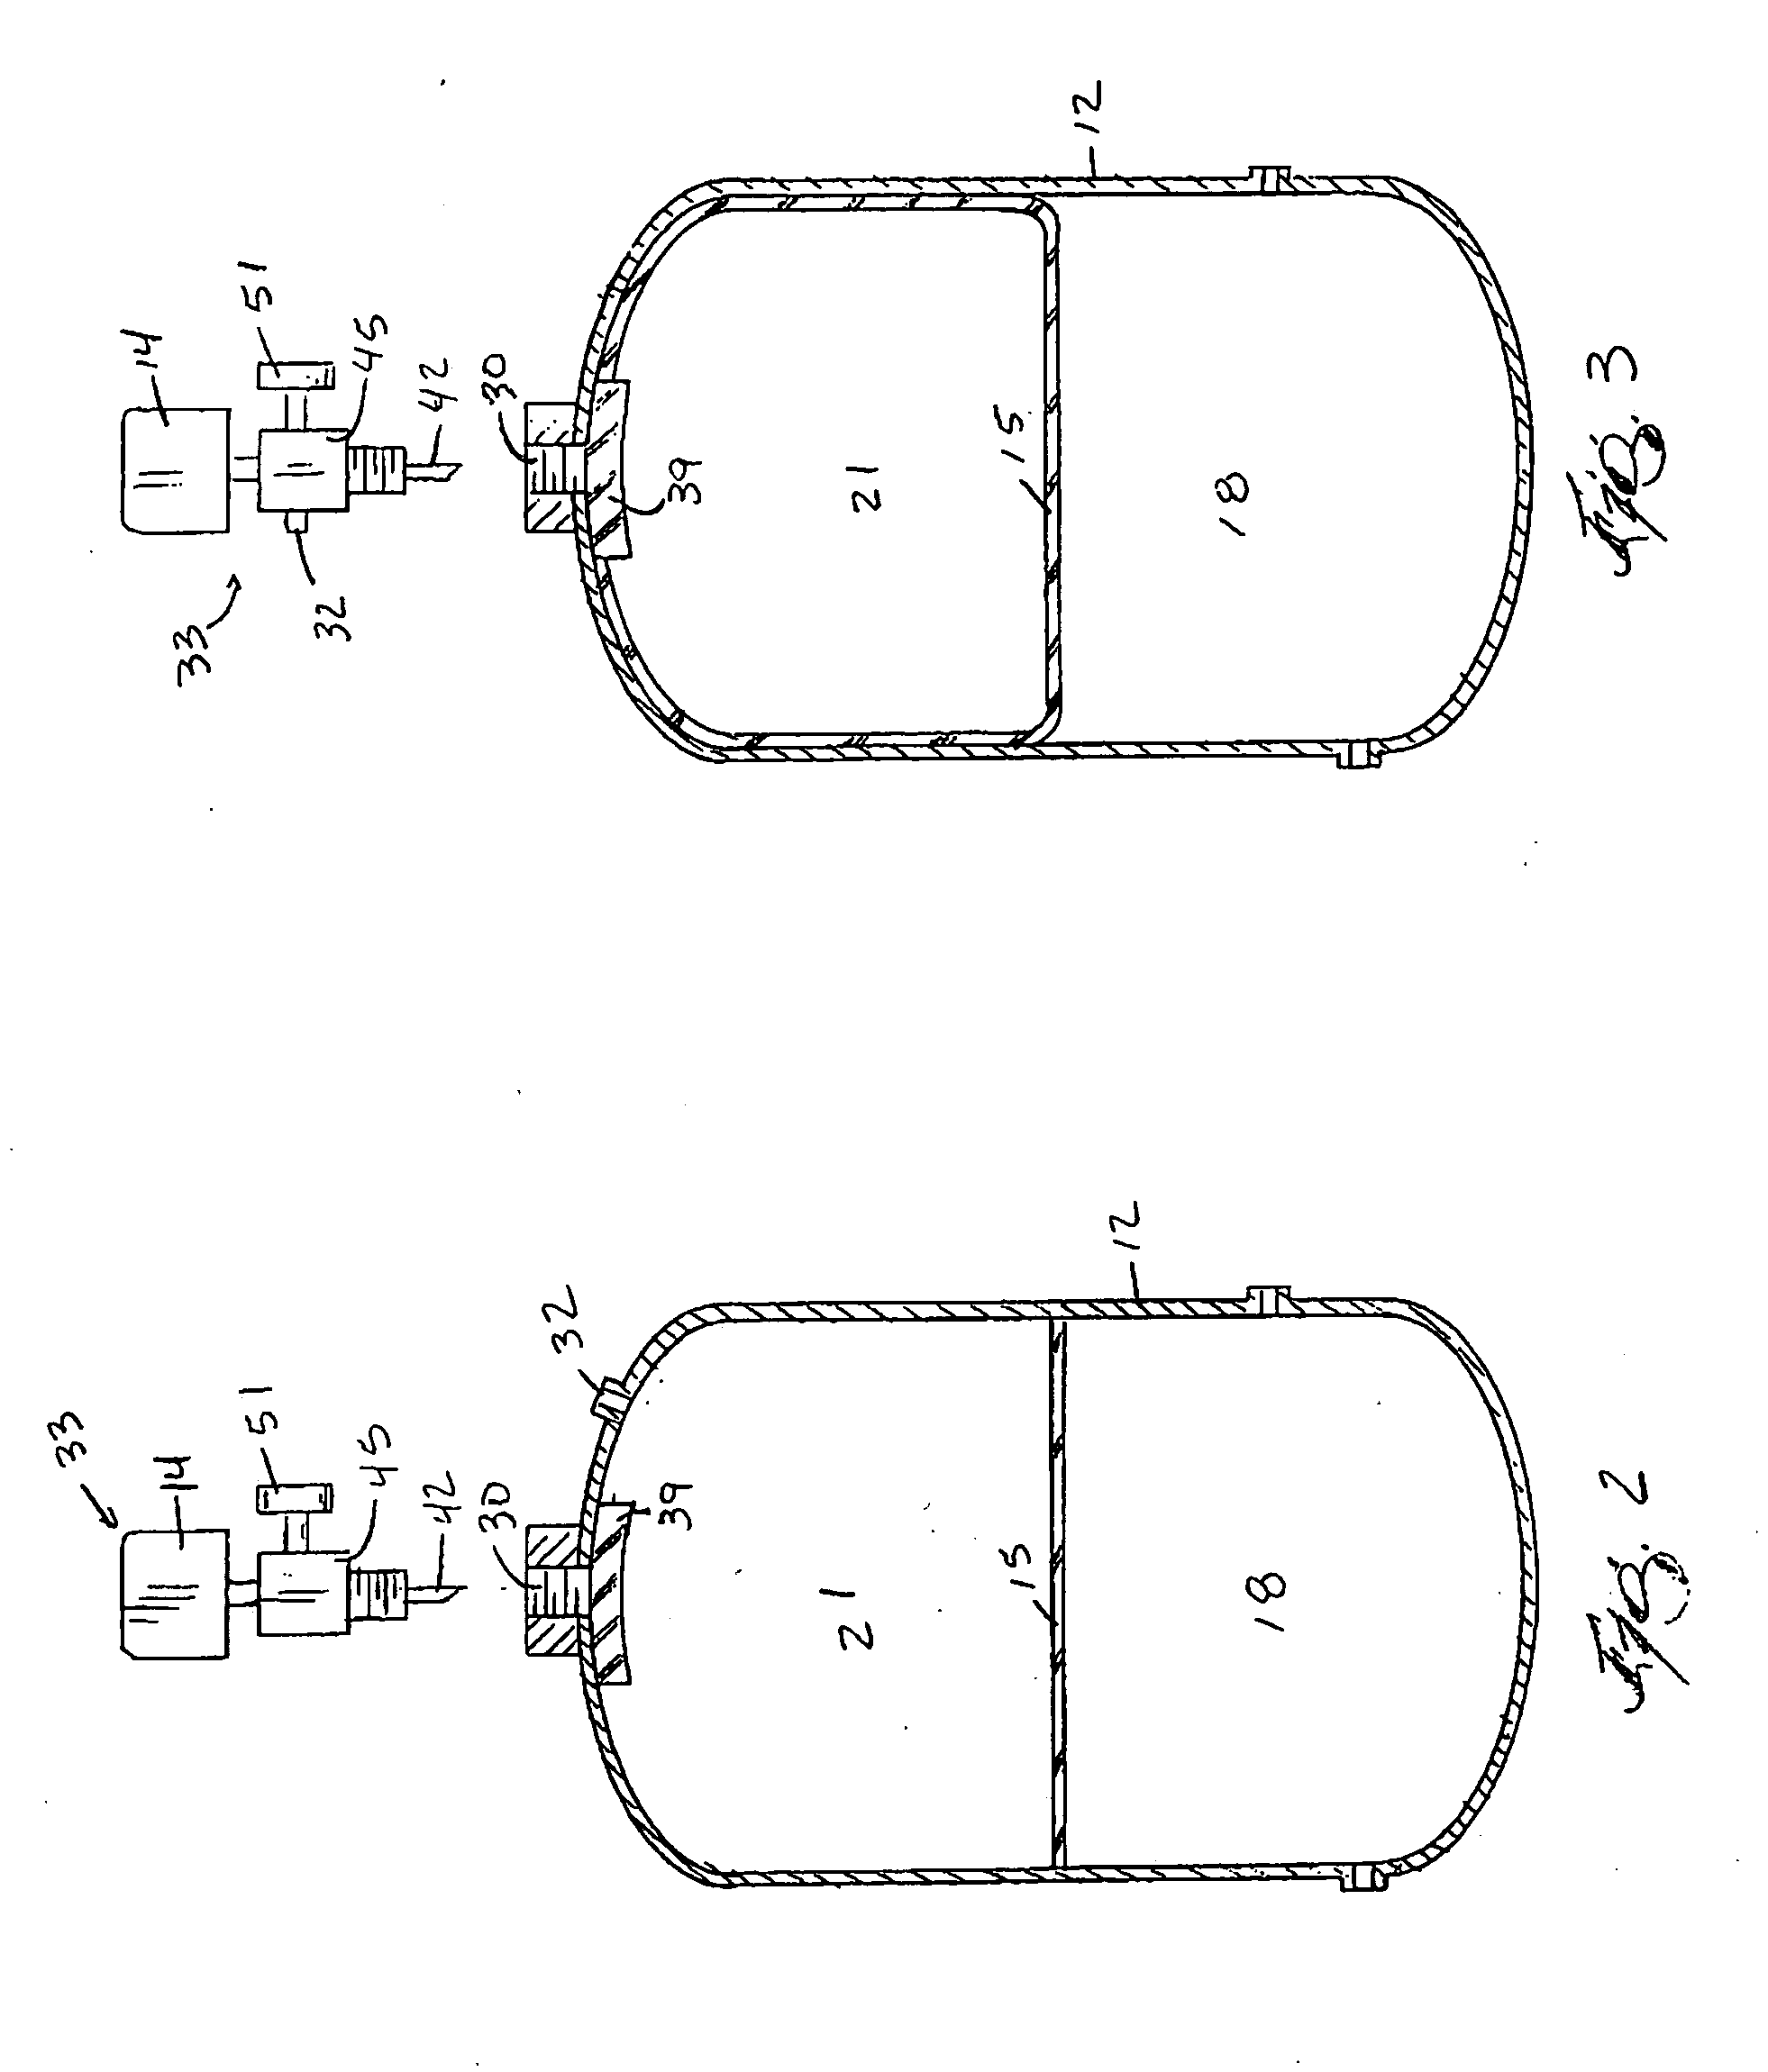 Apparatus and method for containing and regulating the pressure in a pressure vessel